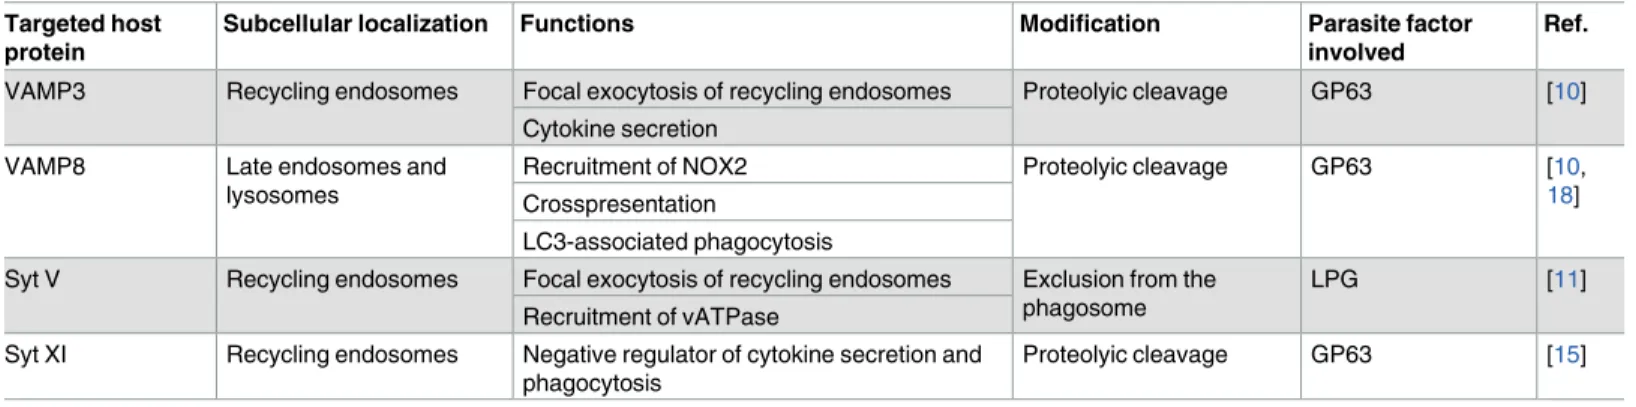 Table 1. Components of the host cell membrane fusion machinery targeted by Leishmania parasites